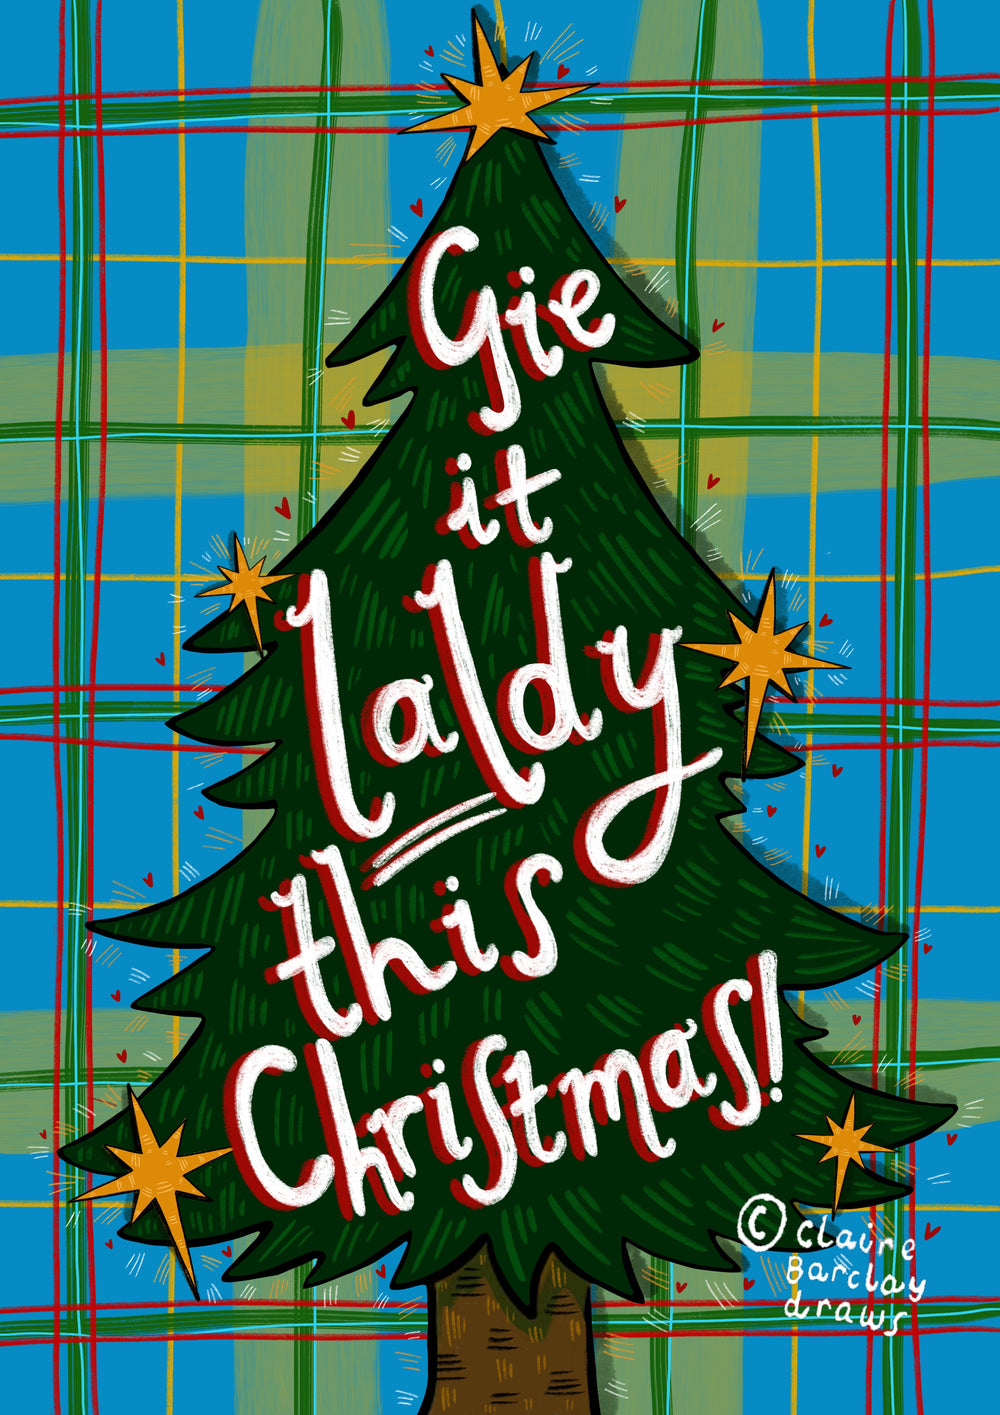 Gie it Laldy this Christmas! Xmas Card